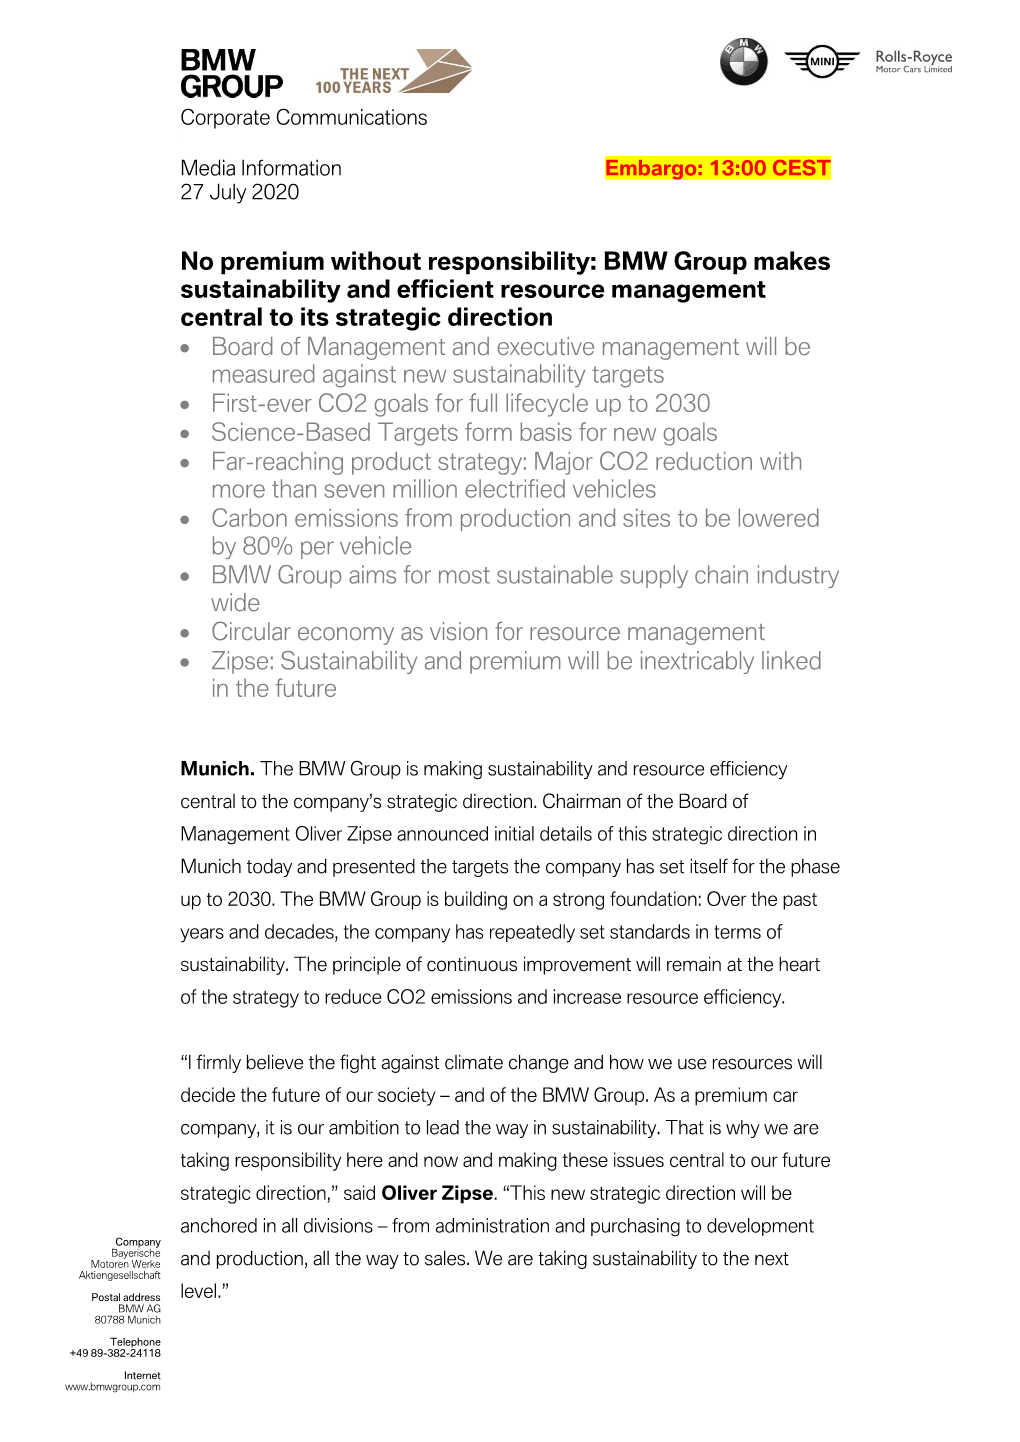 BMW Group Makes Sustainability and Efficient Resource Management